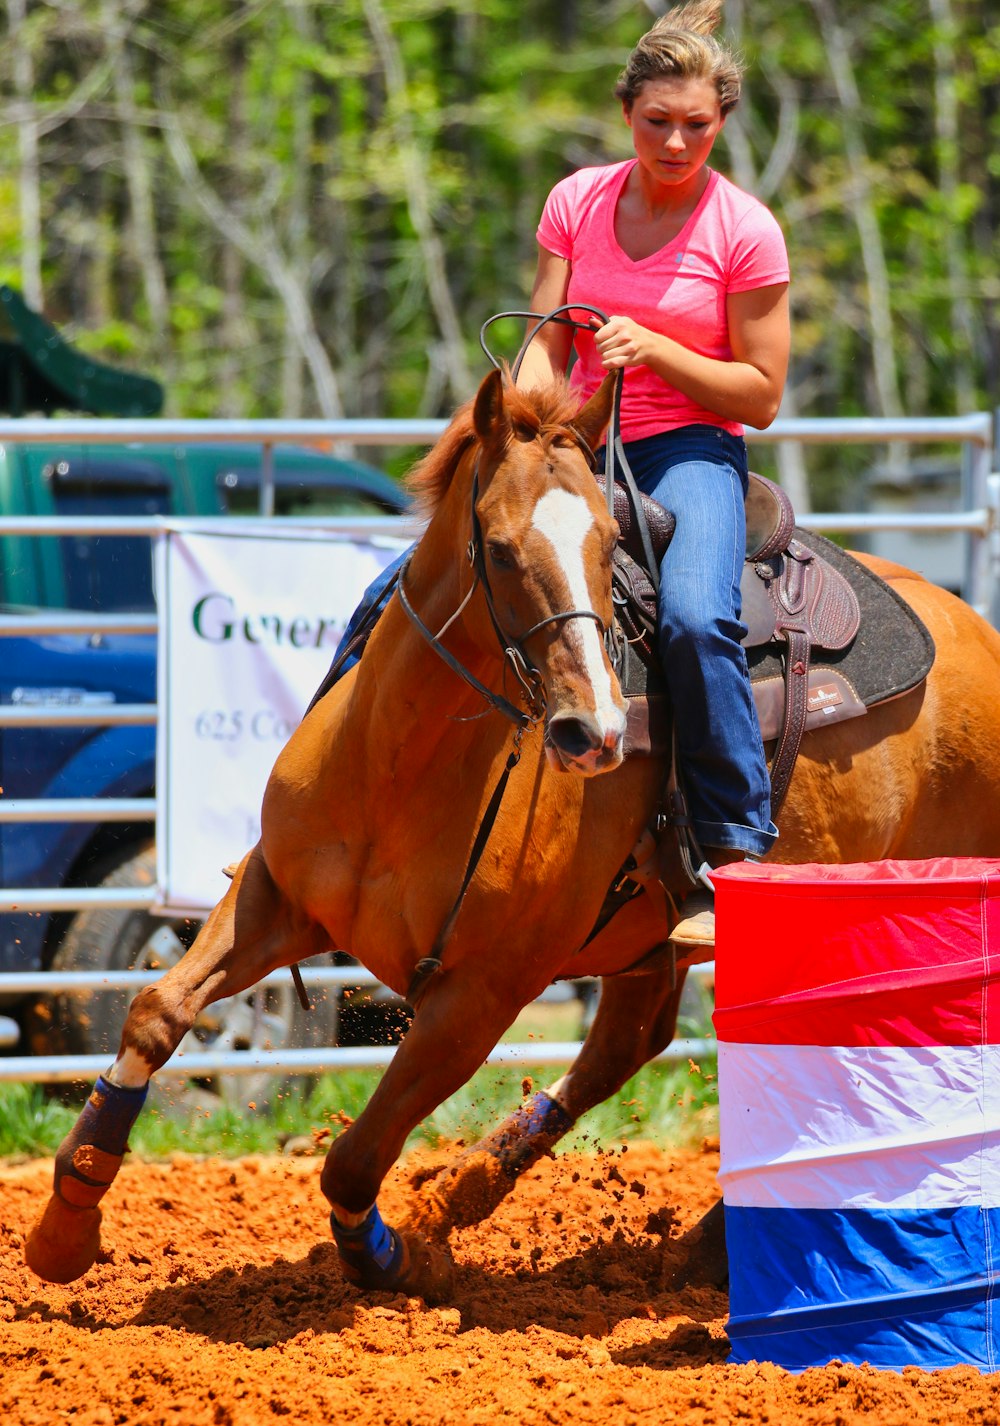 girl in pink t-shirt riding brown horse during daytime